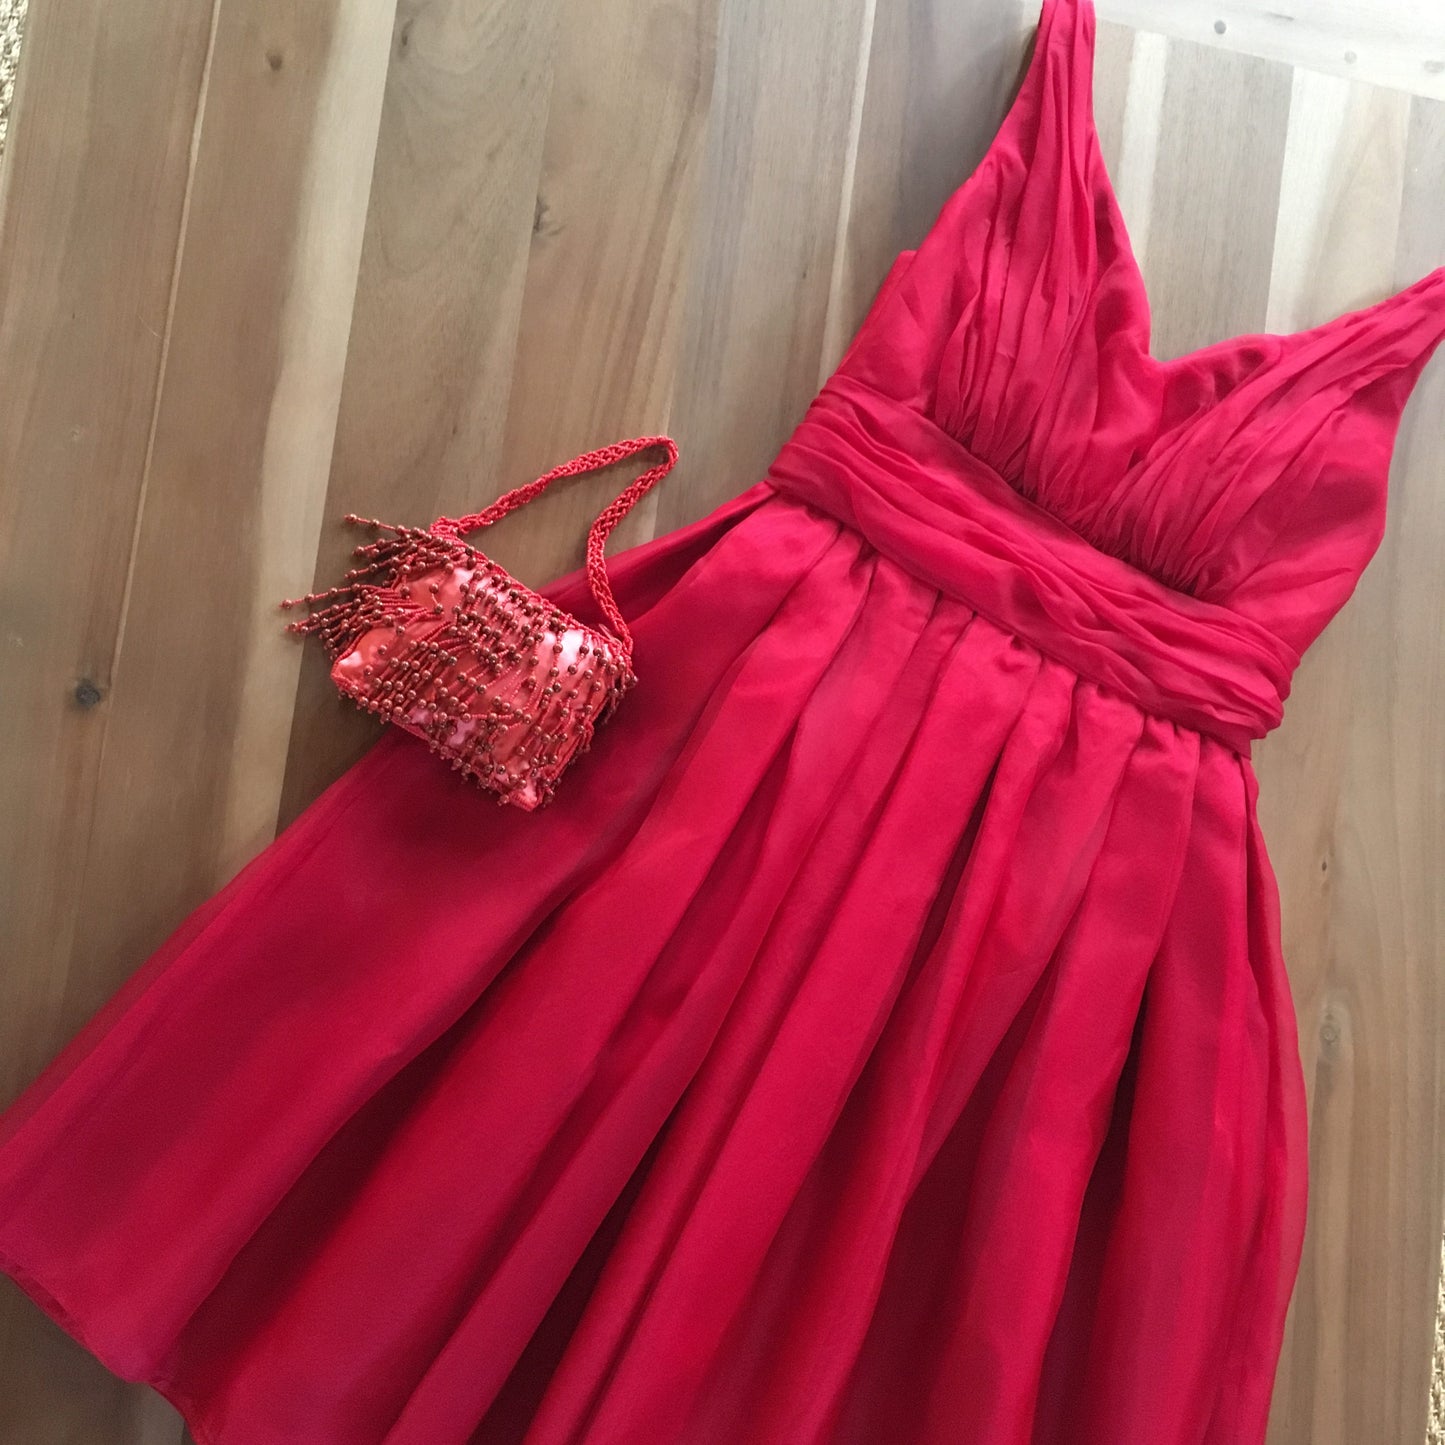 Magnolia Dress in Red